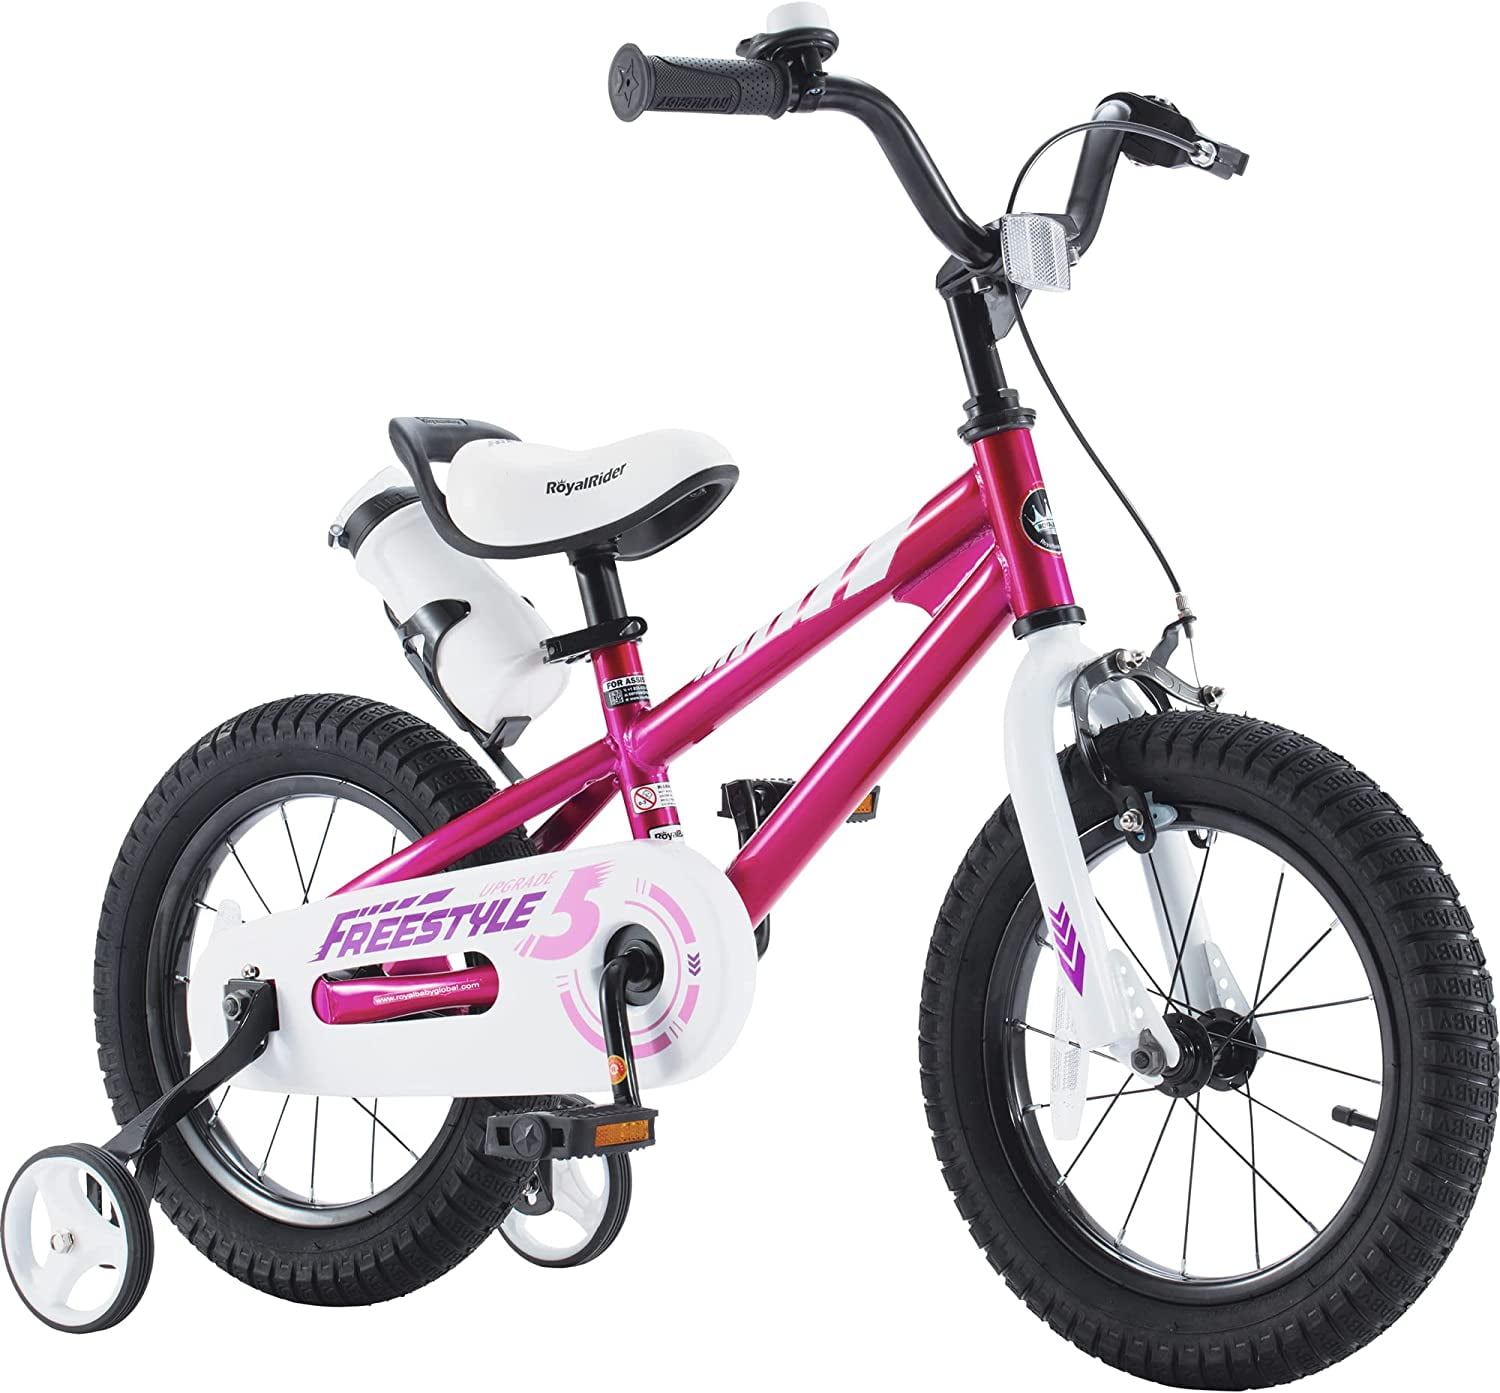 Dripex 12 Inch Girls Bike with Training Wheels and Basket for Kids Ages 2-5 Pink 